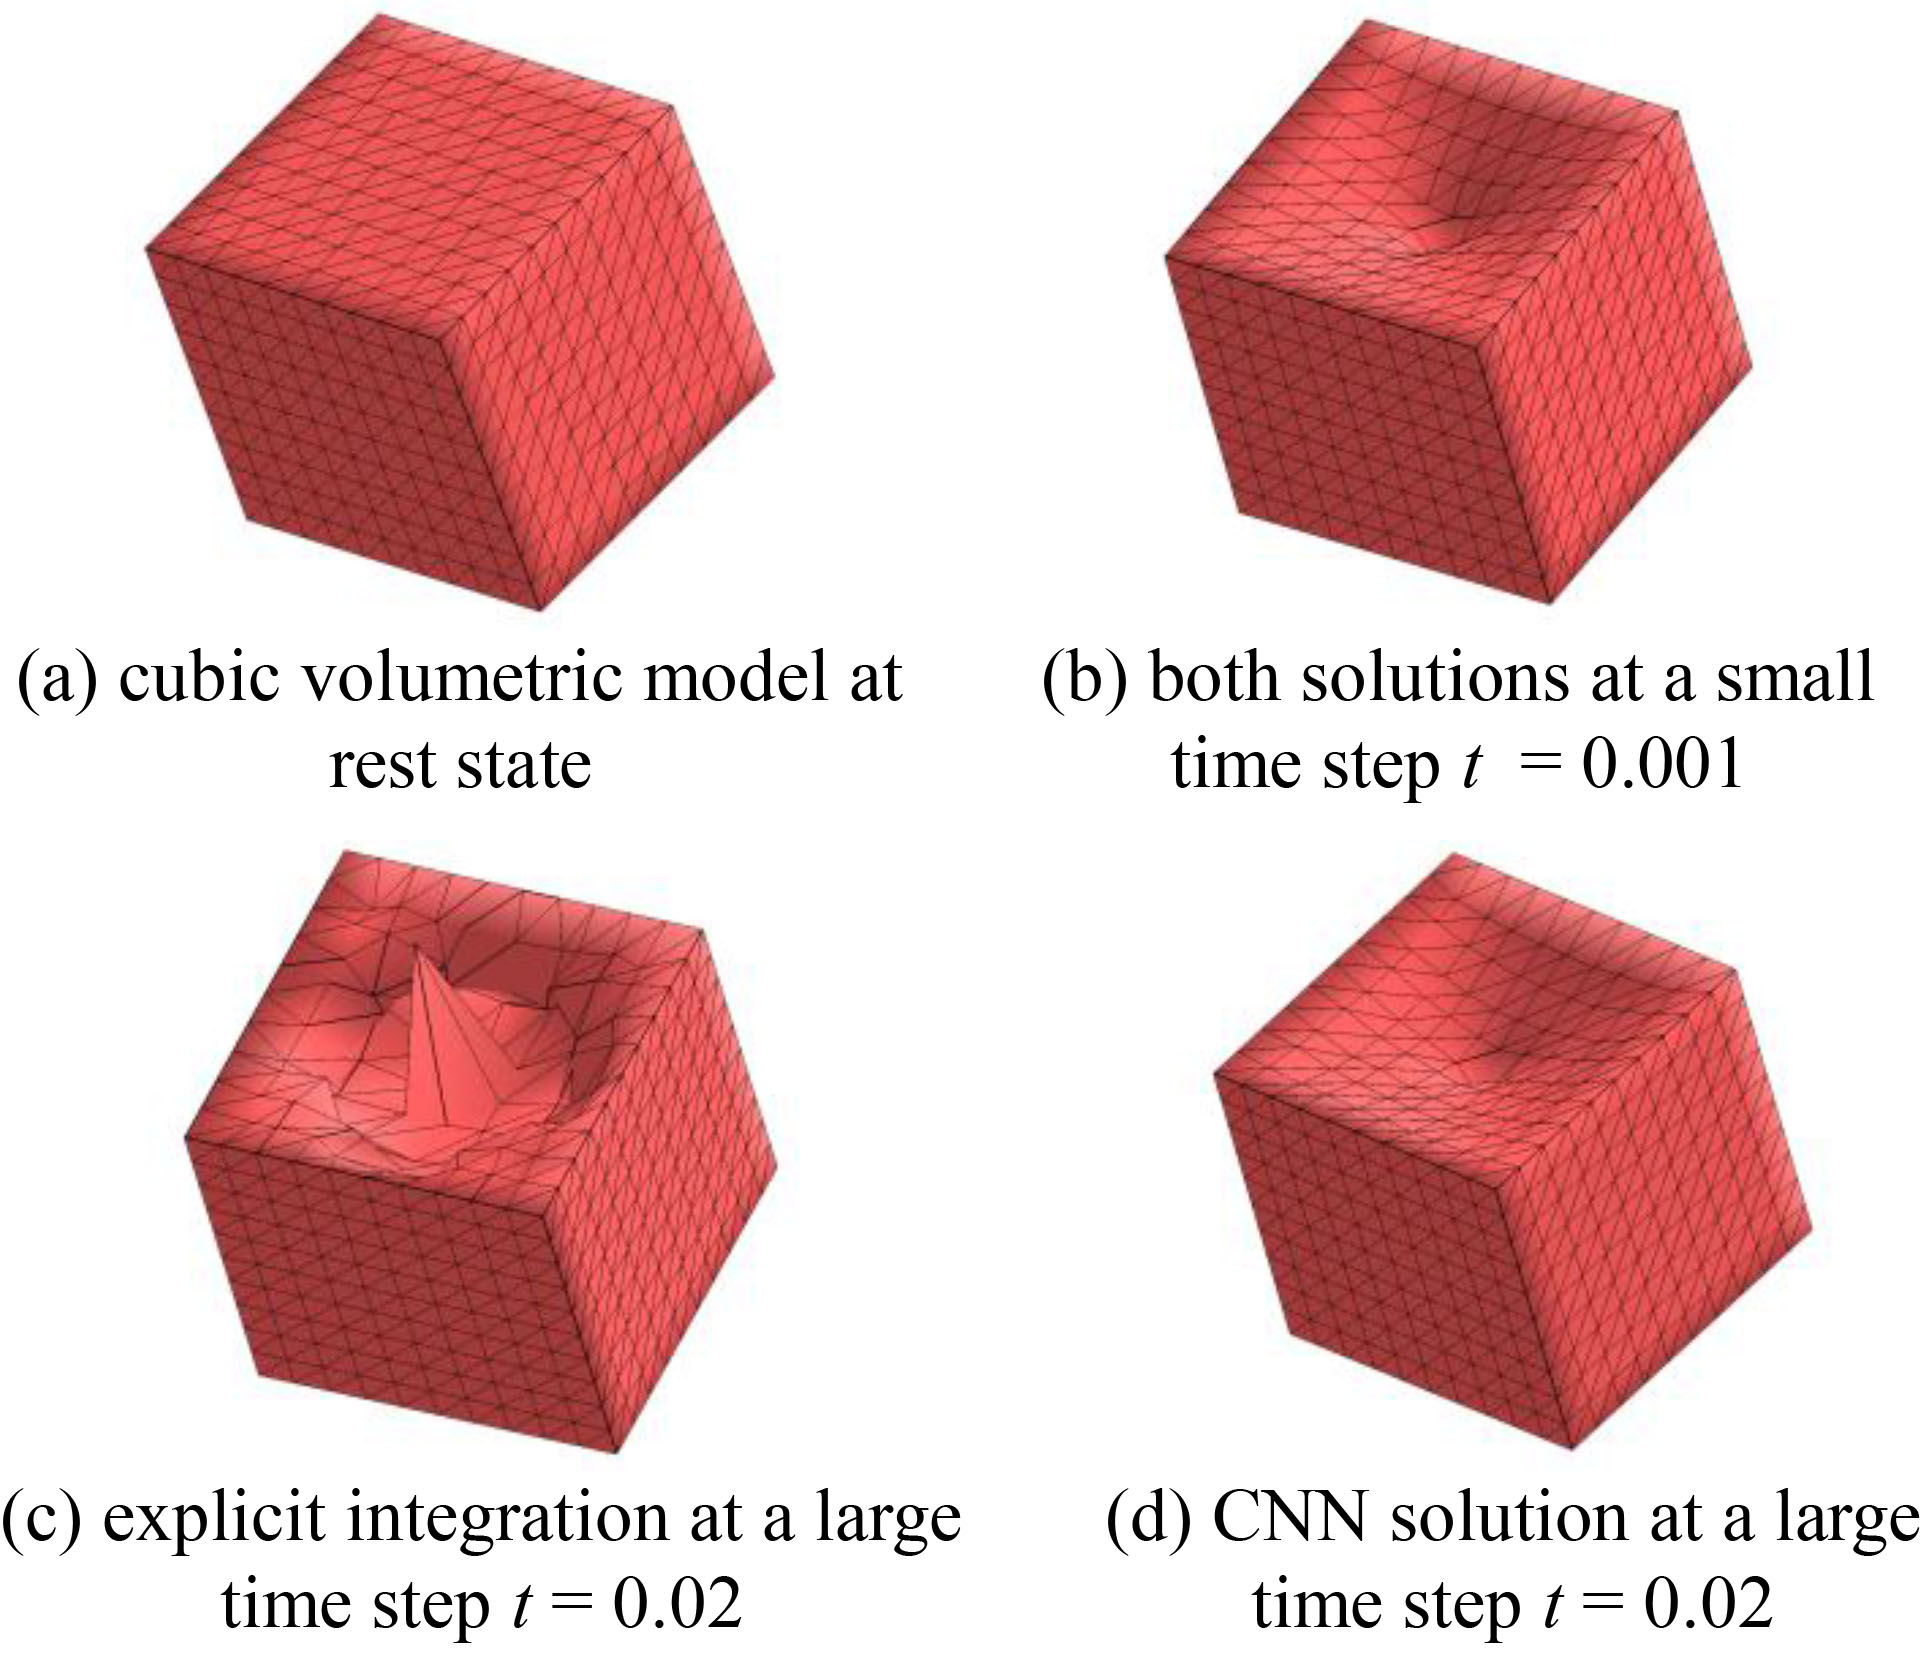 Comparison between the proposed CNN and explicit integration at a small and large time step.